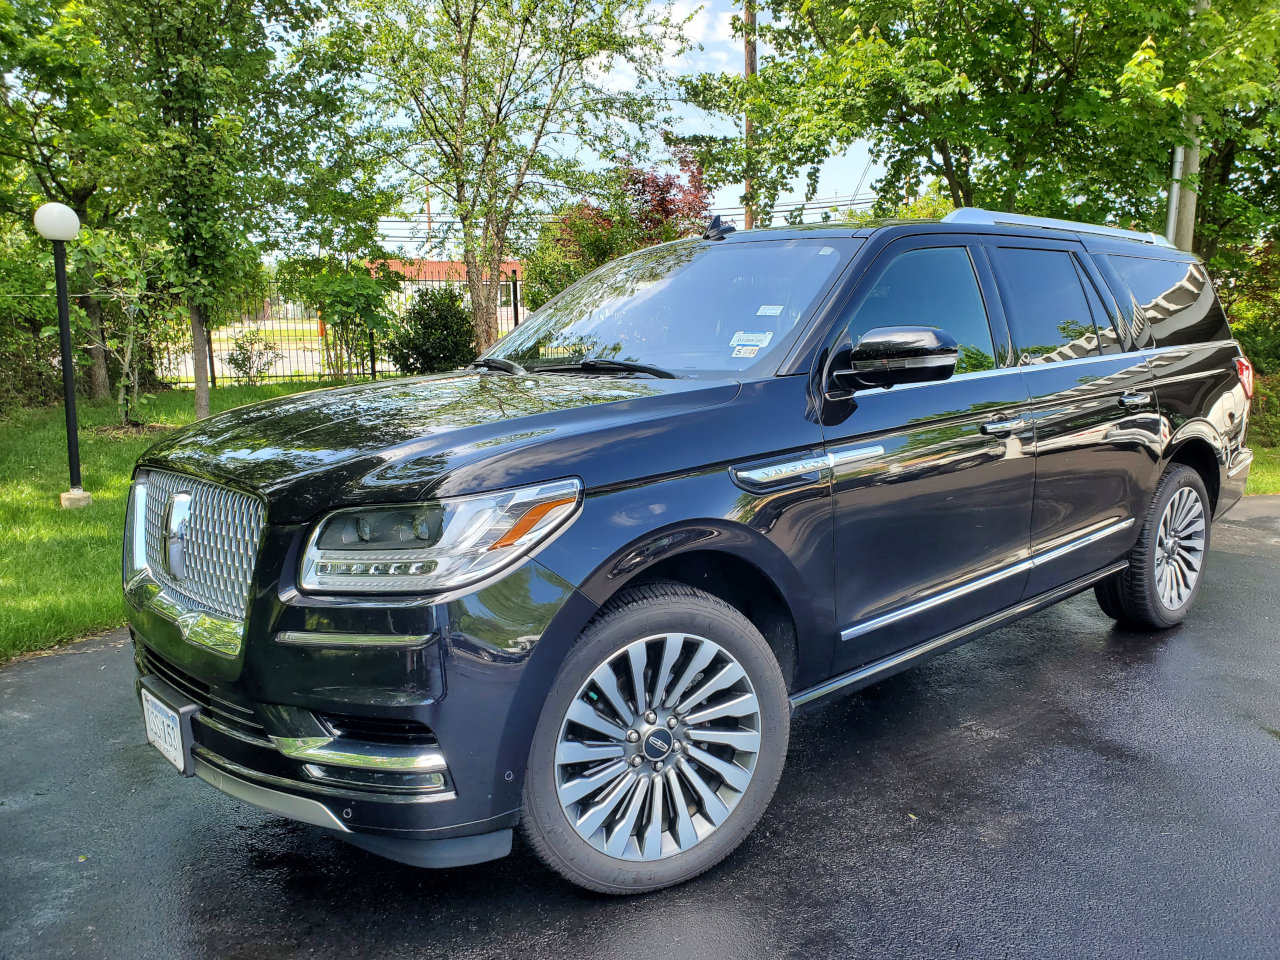 A black lincoln navigator parked in the street.